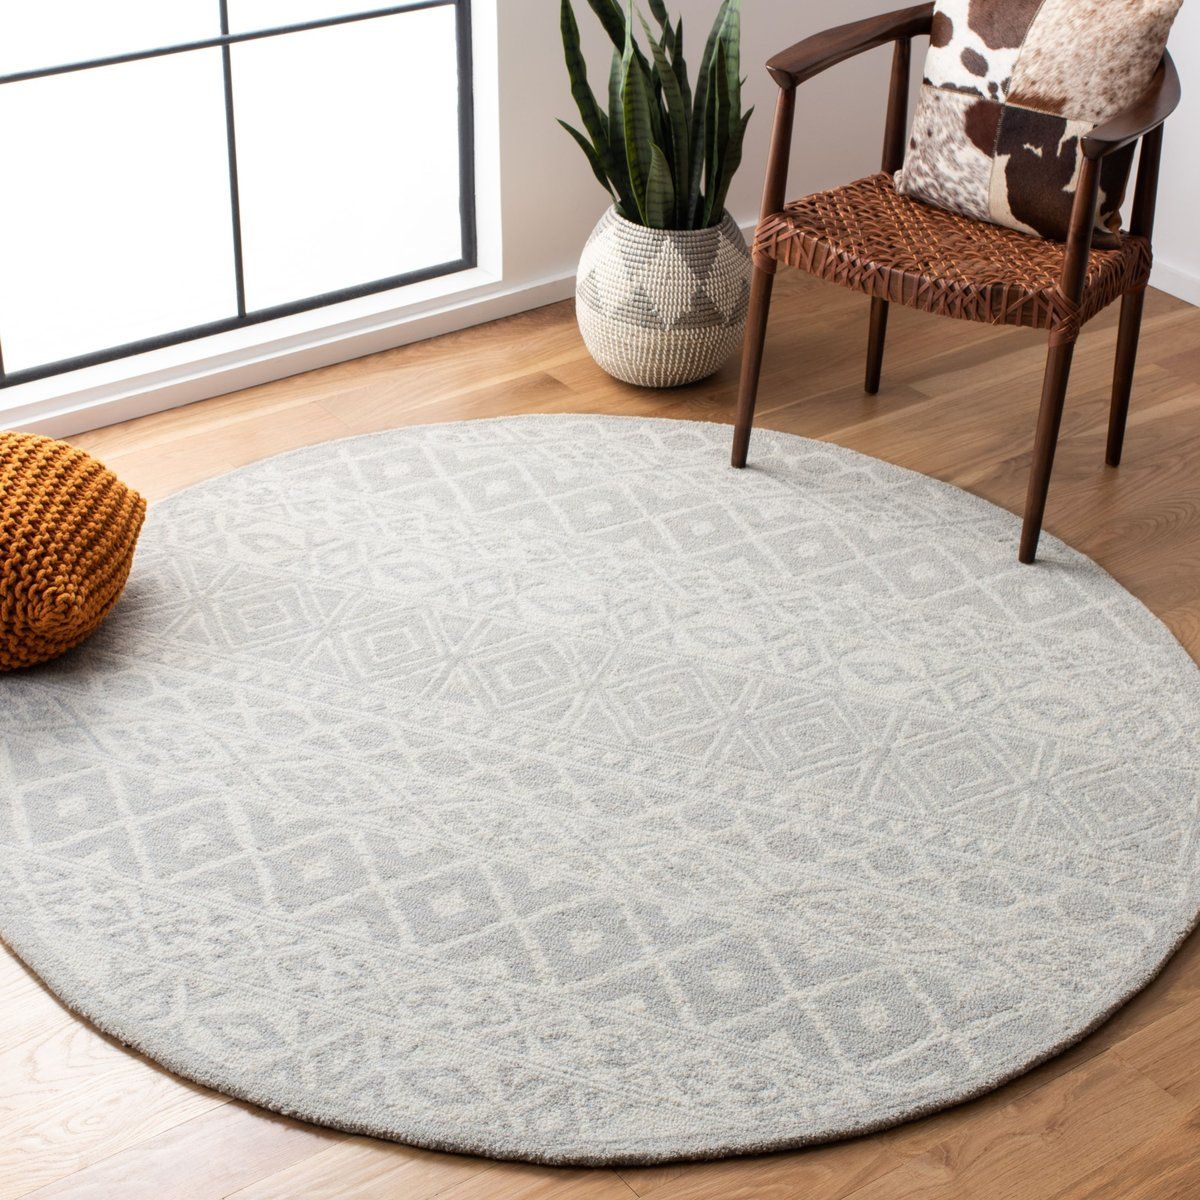 Safavieh Blossom Blm 113 Rugs | Rugs Direct With Ivory Blossom Oval Rugs (View 14 of 15)